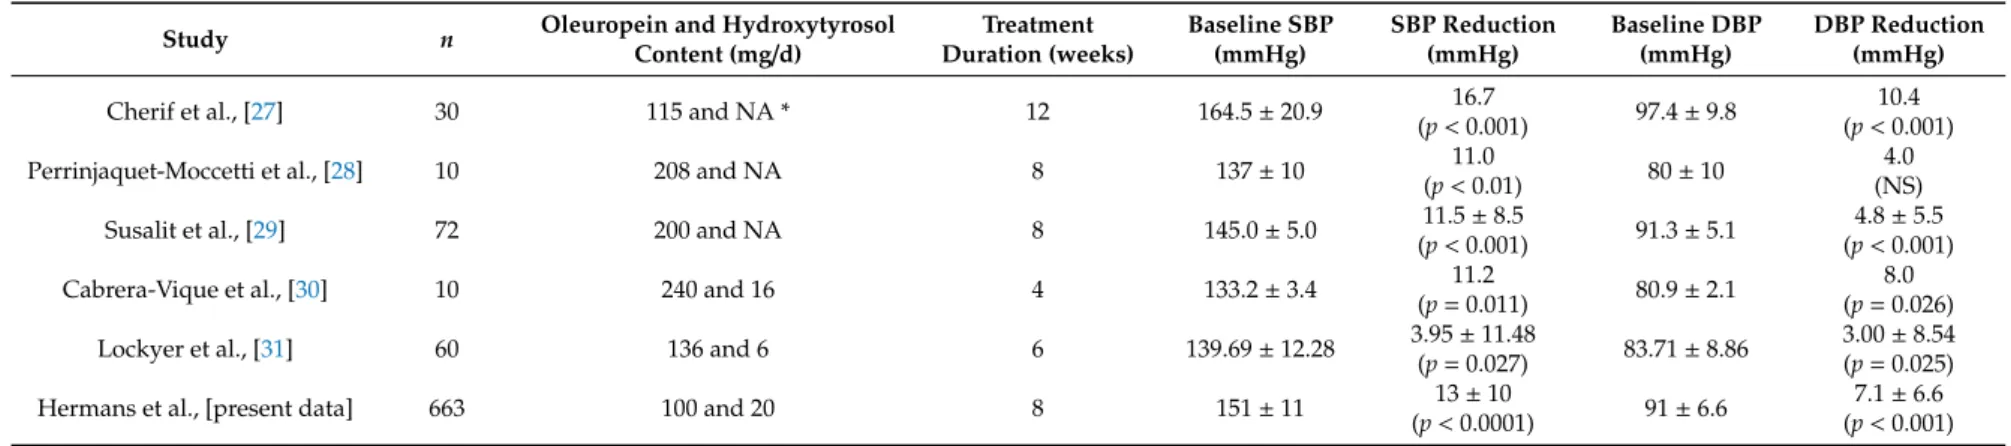 Table 5. Comparison of studies on blood pressure reduction after treatment with oleuropein and hydroxytyrosol.